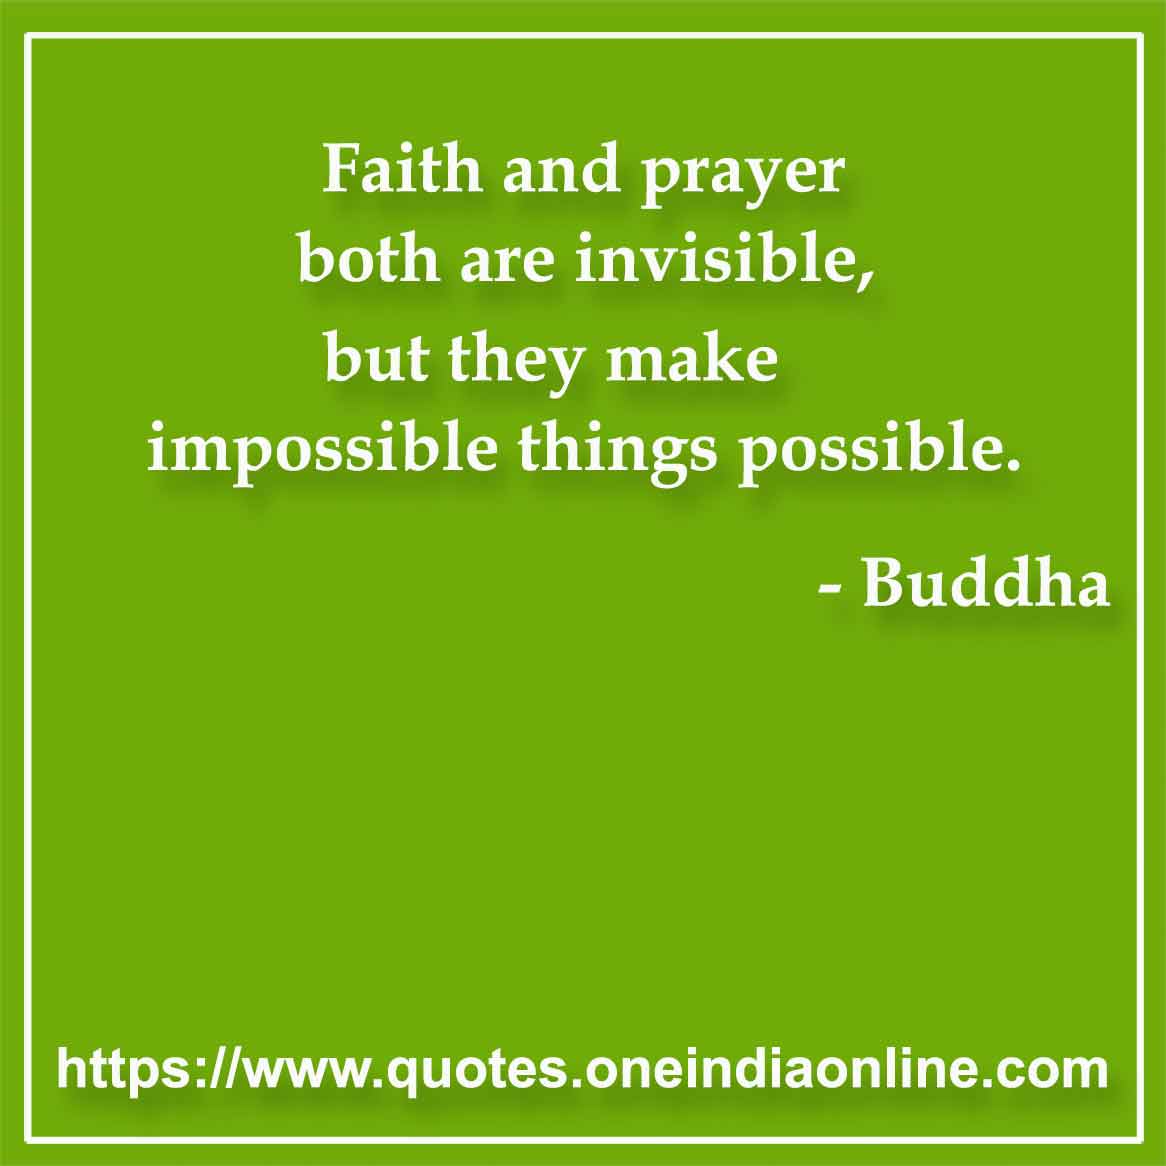 Faith and prayer both are invisible, but they make impossible things possible.

-  Buddha